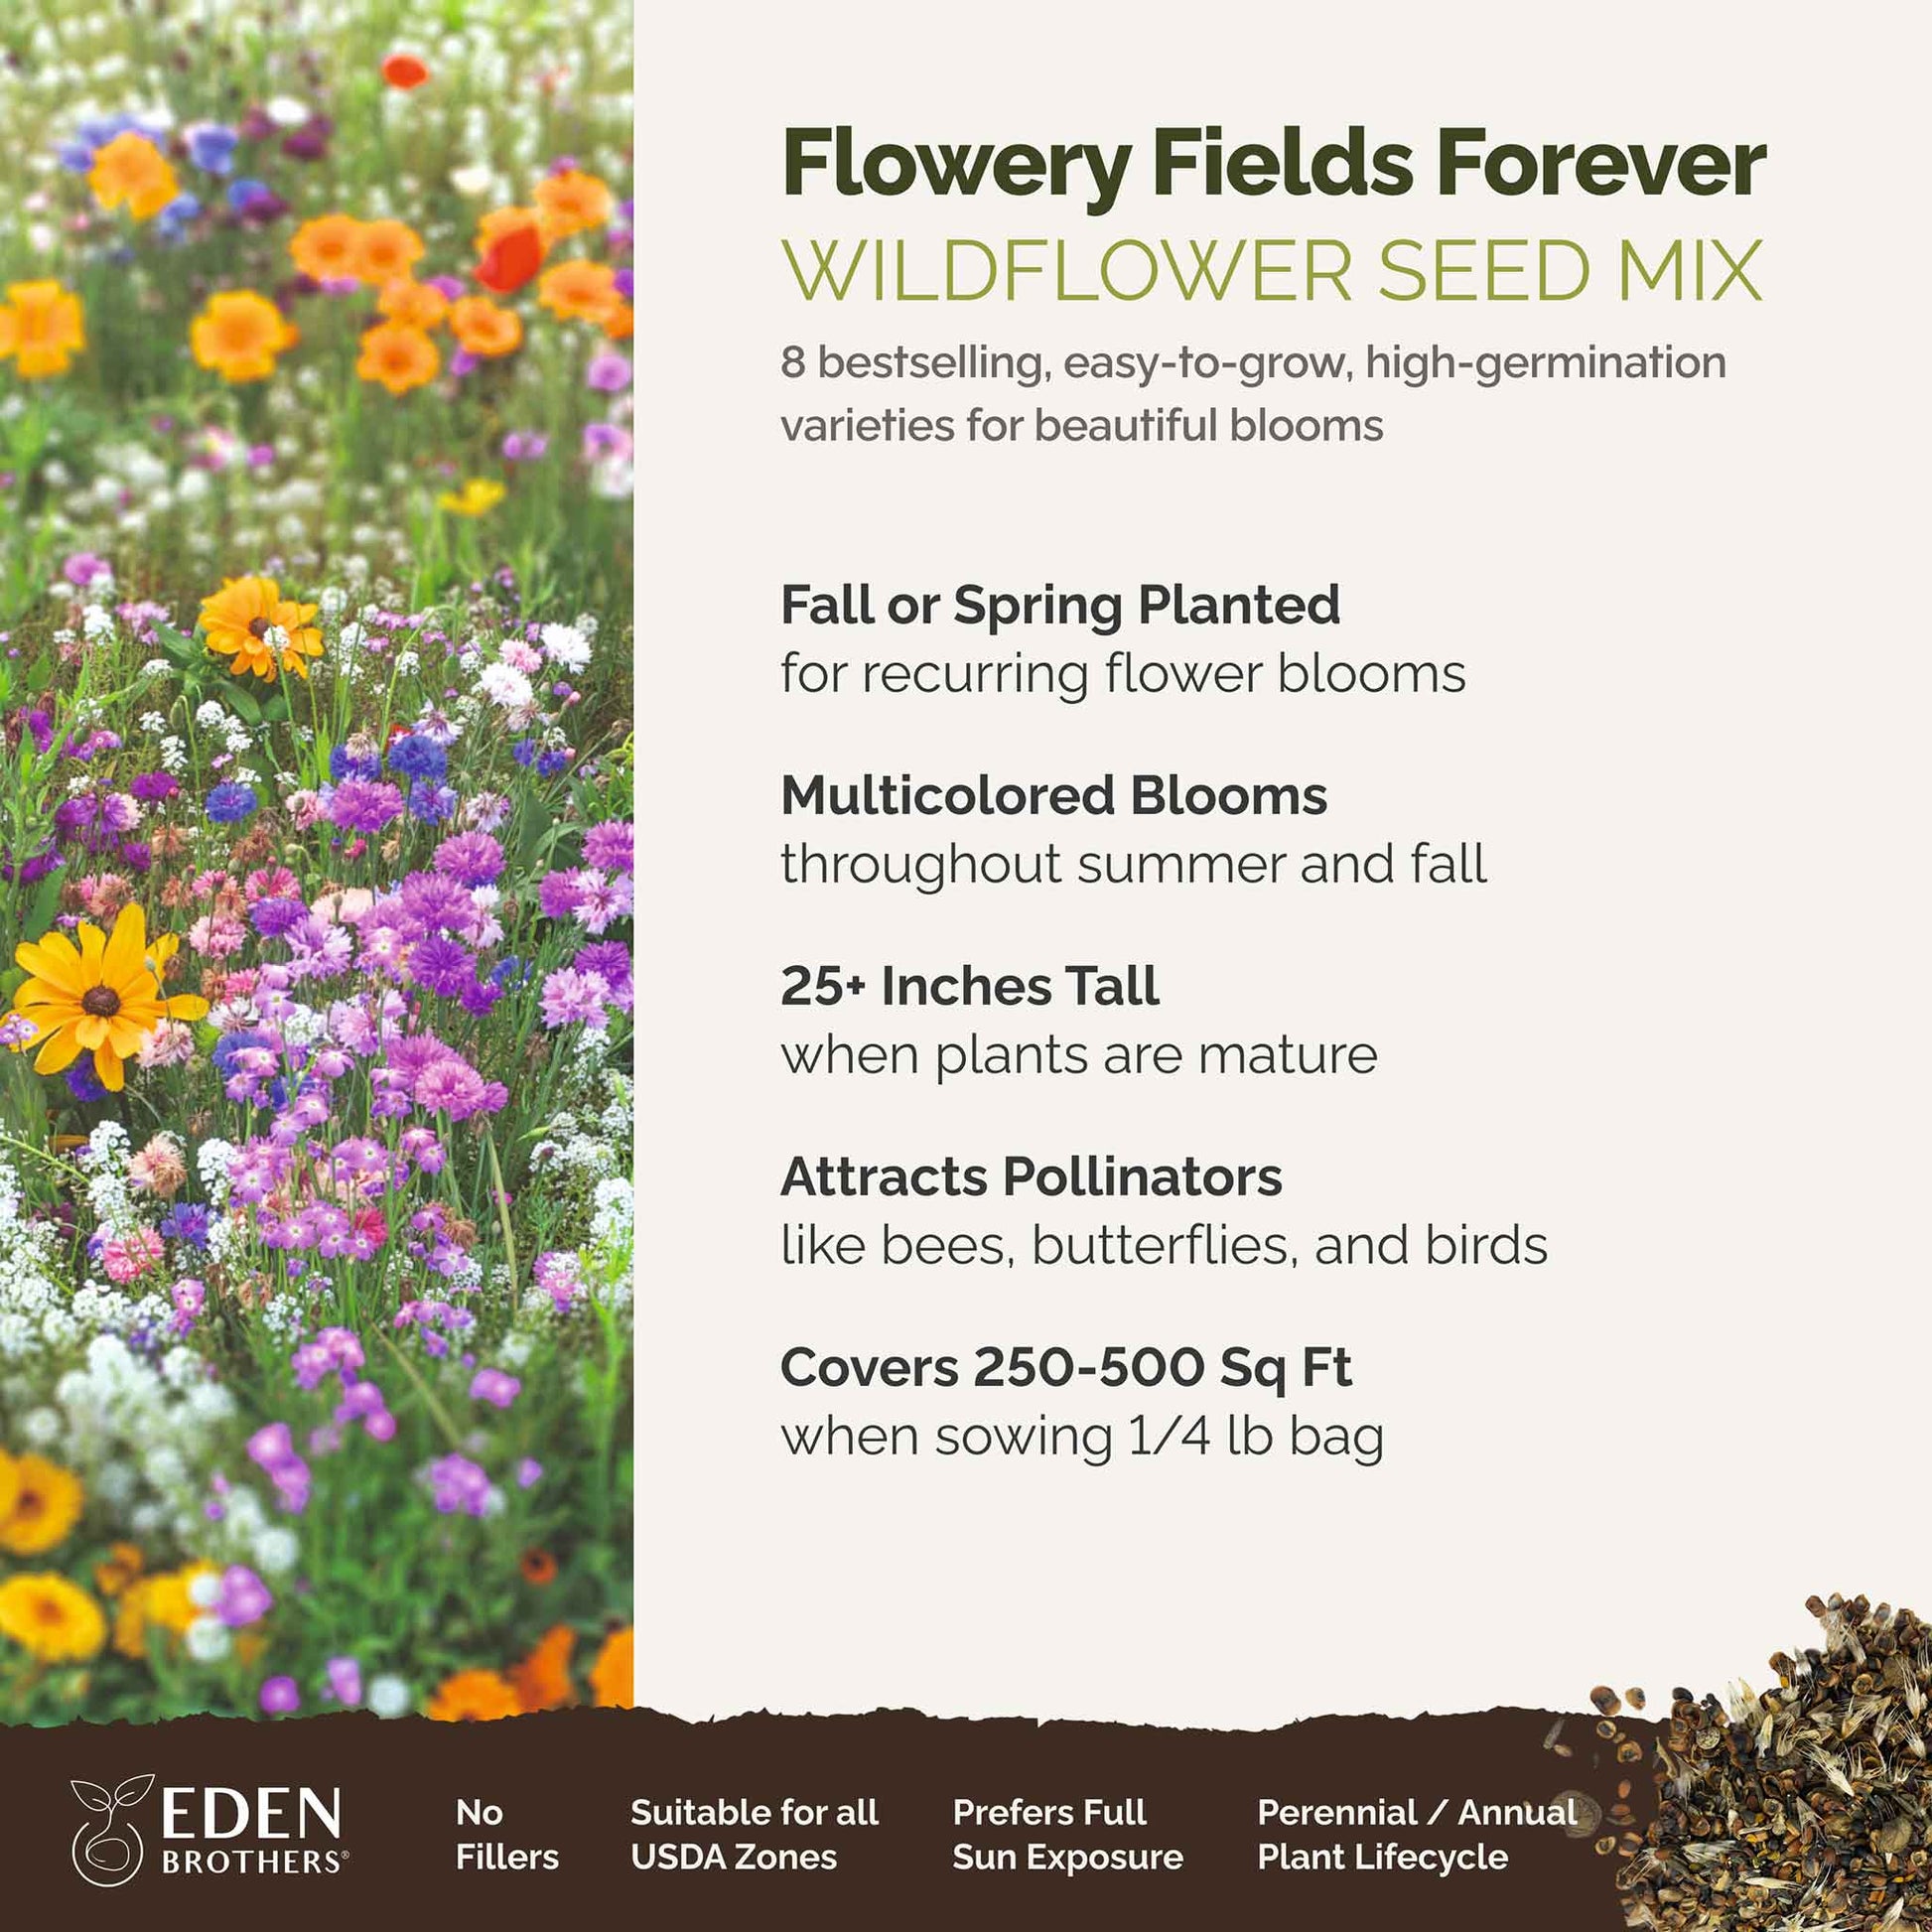 flowery fields forever overview